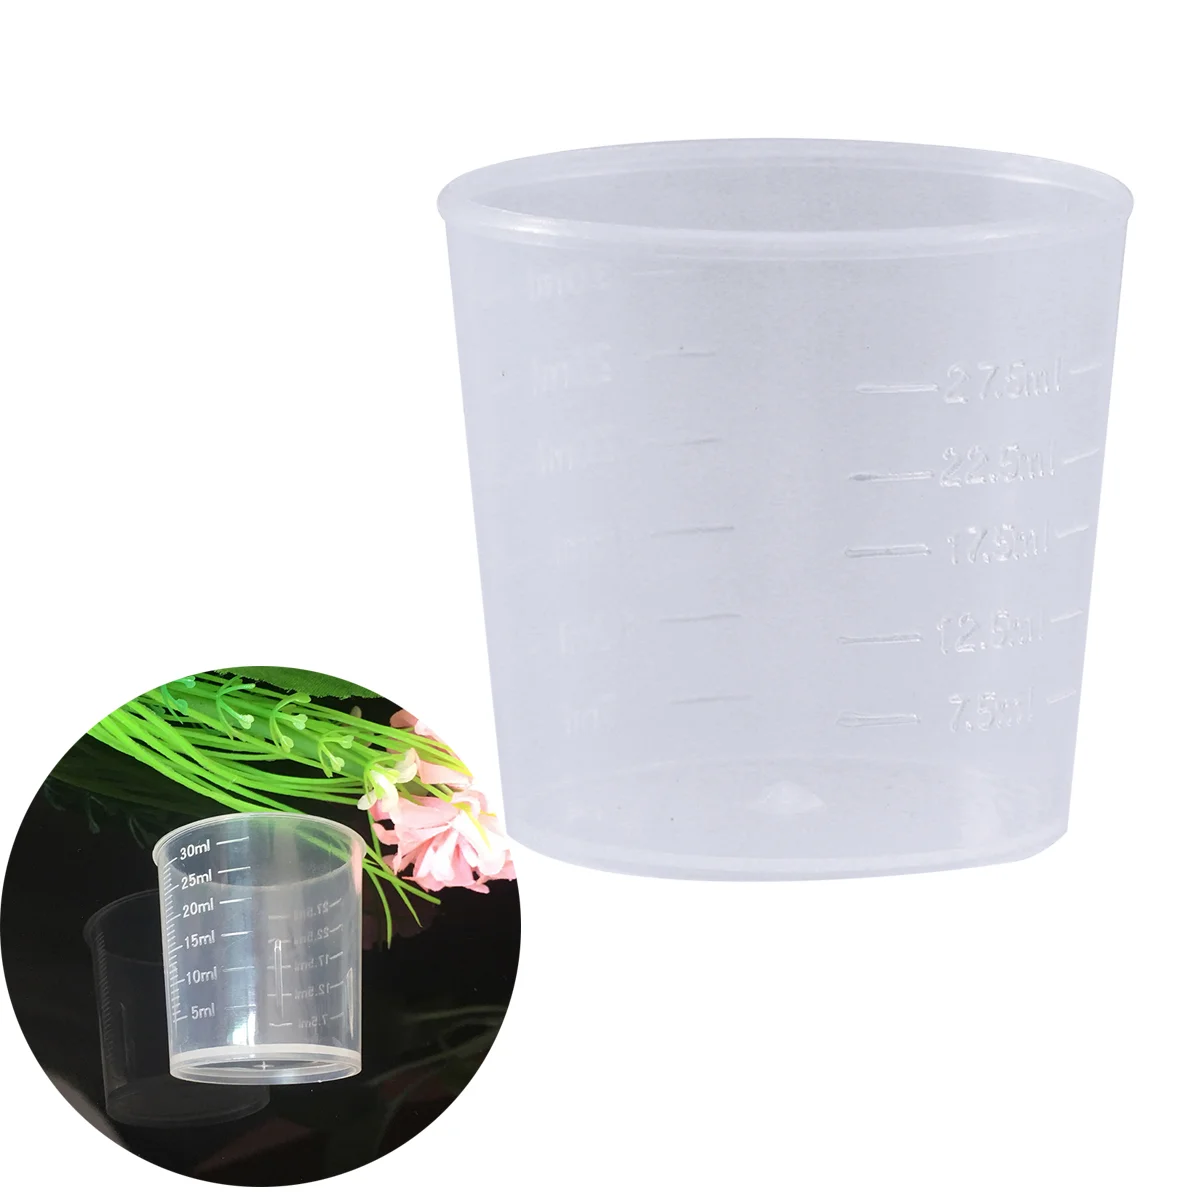 

50pcs 30ml Plastic Graduated Cups Measuring Scale Cups Transparent Liquid Container for Mixing Paint Stain Epoxy Resin